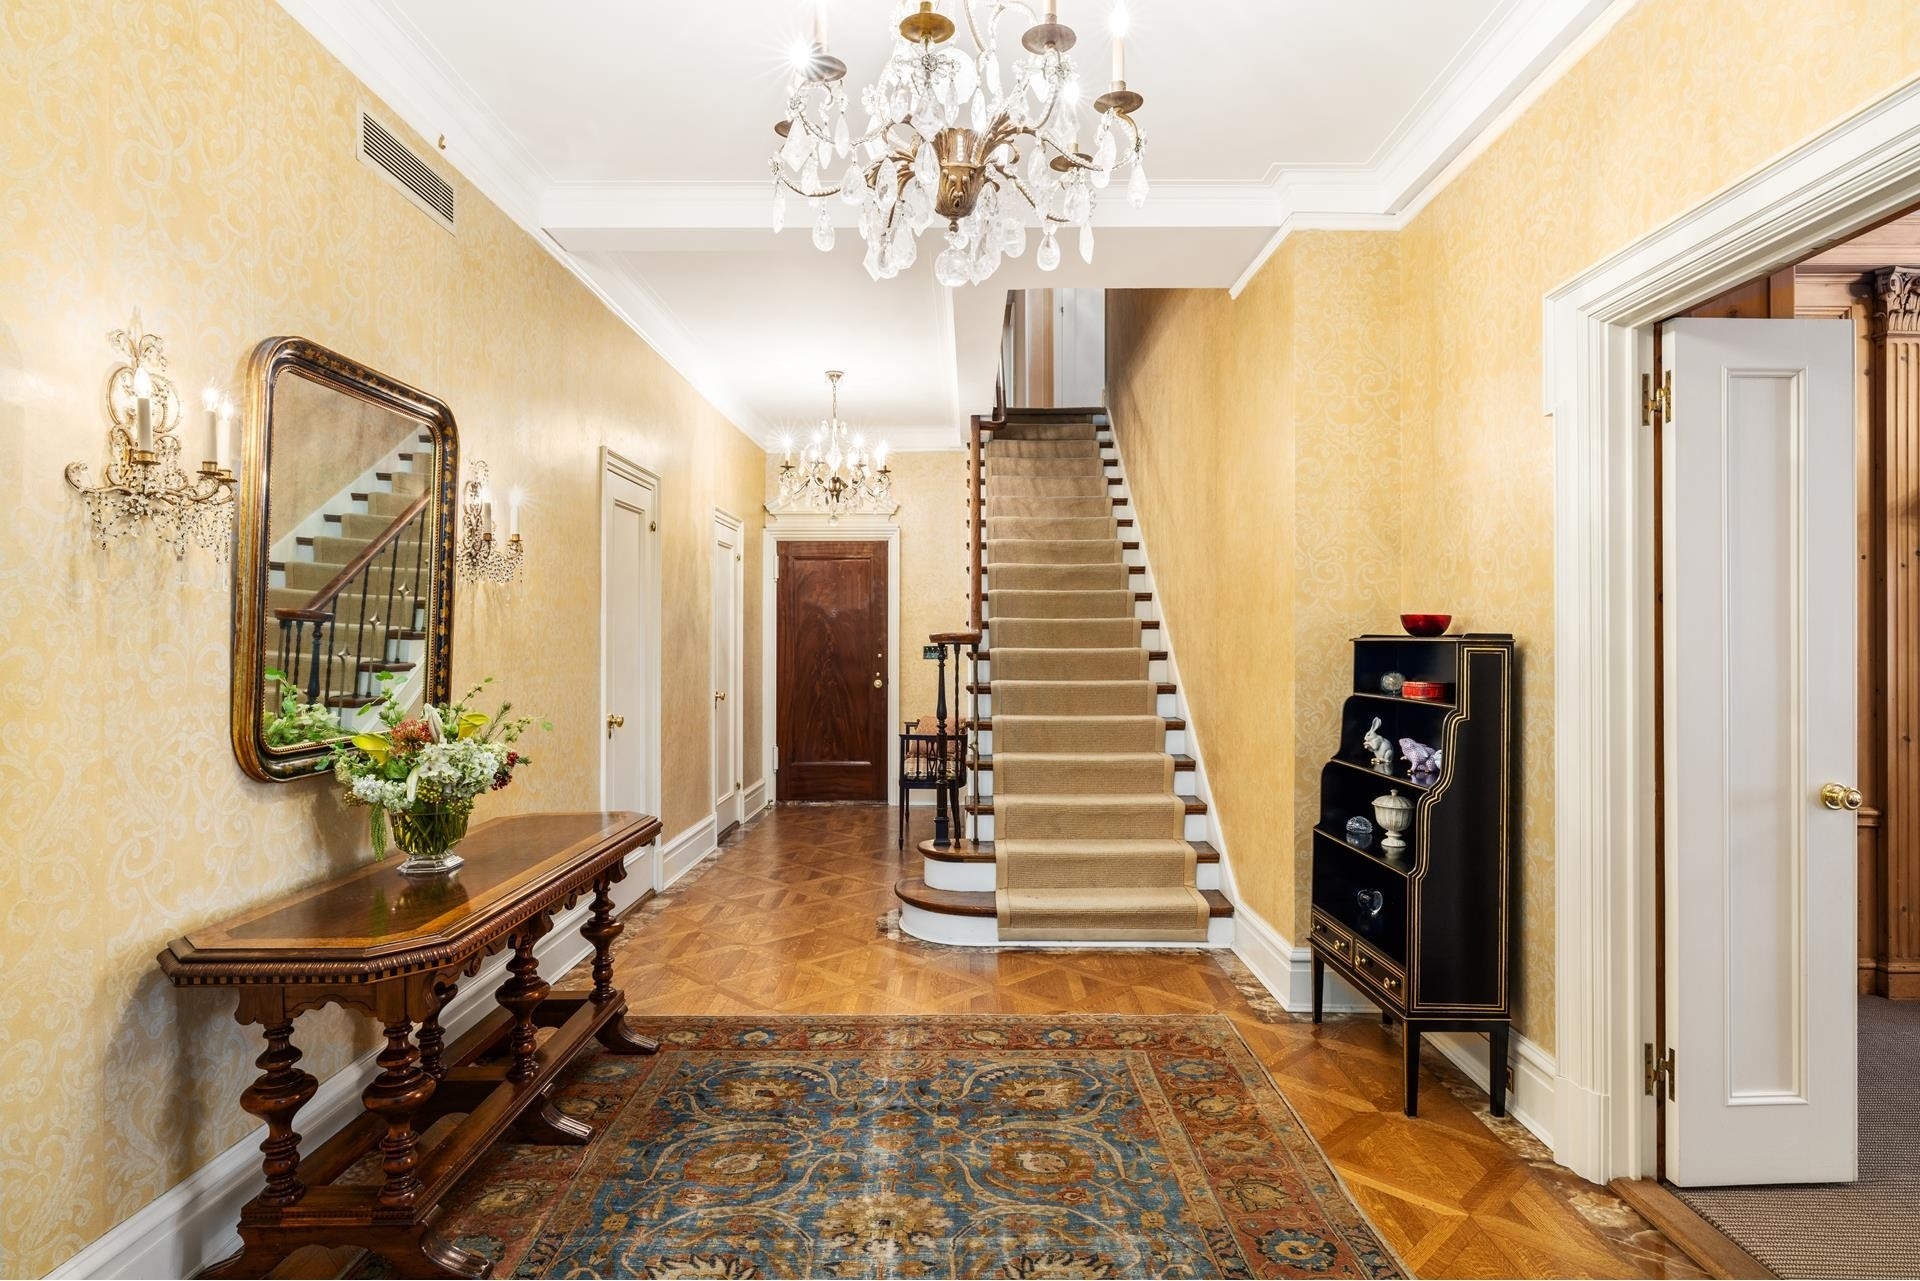 Co-op Properties for Sale at 941 PARK AVE, 5/6A Upper East Side, New York, NY 10028